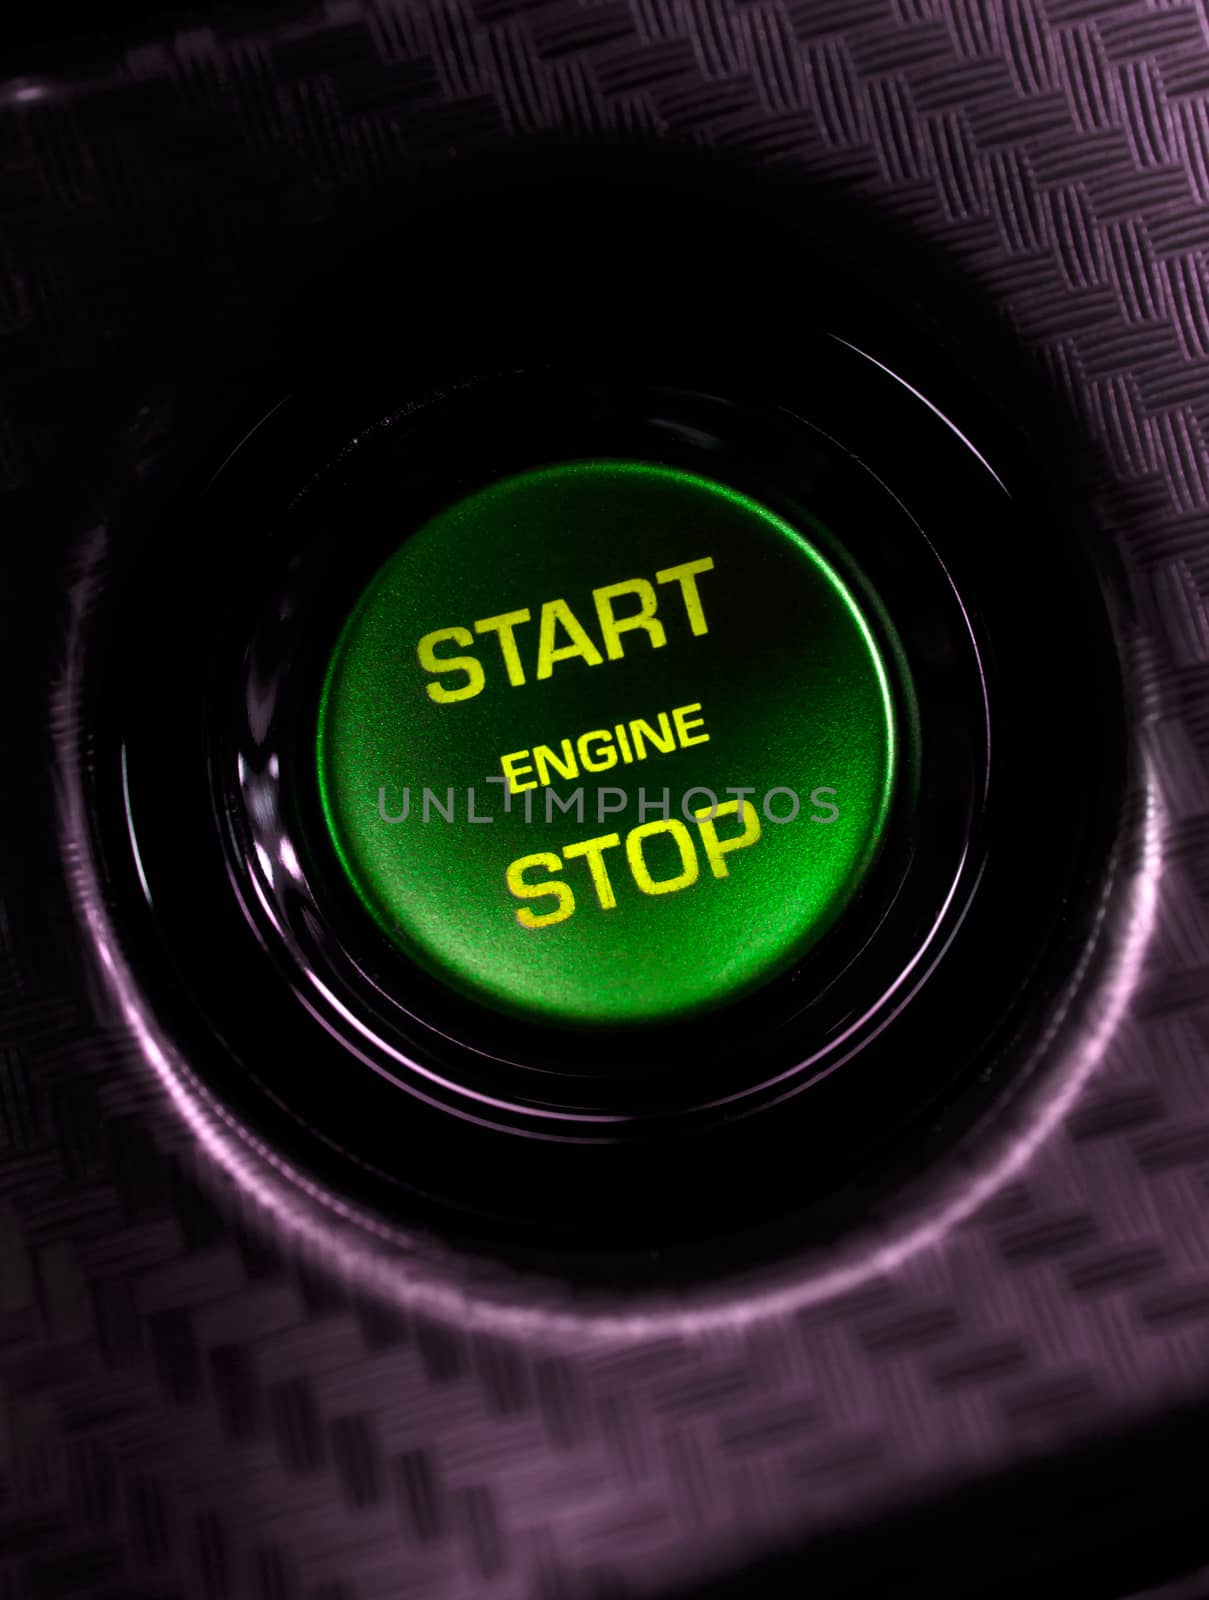 Car engine start and stop button by aselsa